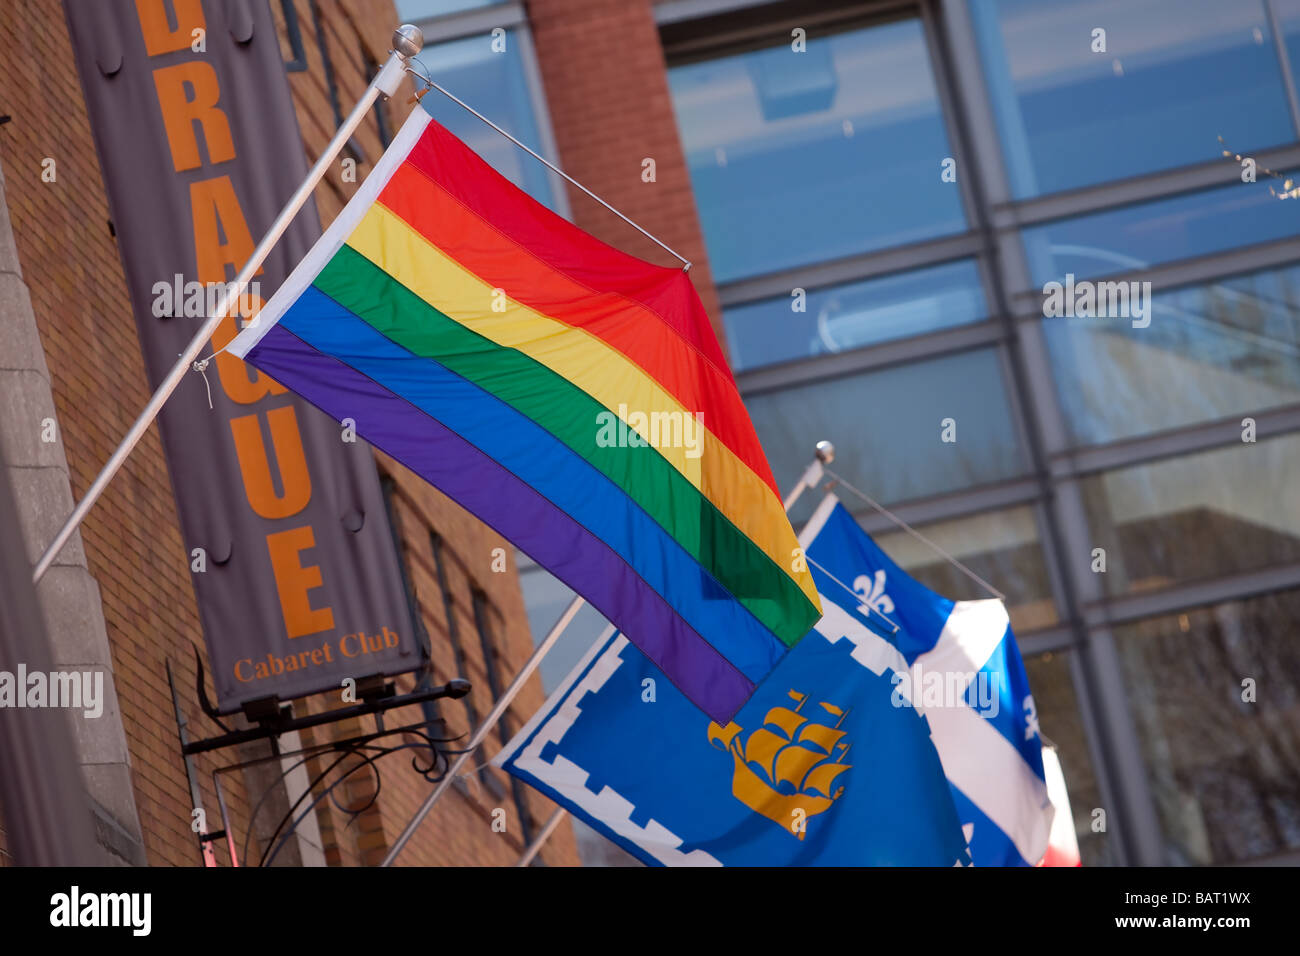 The Rainbow flag also known as Pride flag or Gay flag and the Quebec city flag are seen on Le Drague cabaret club in Quebec city Stock Photo